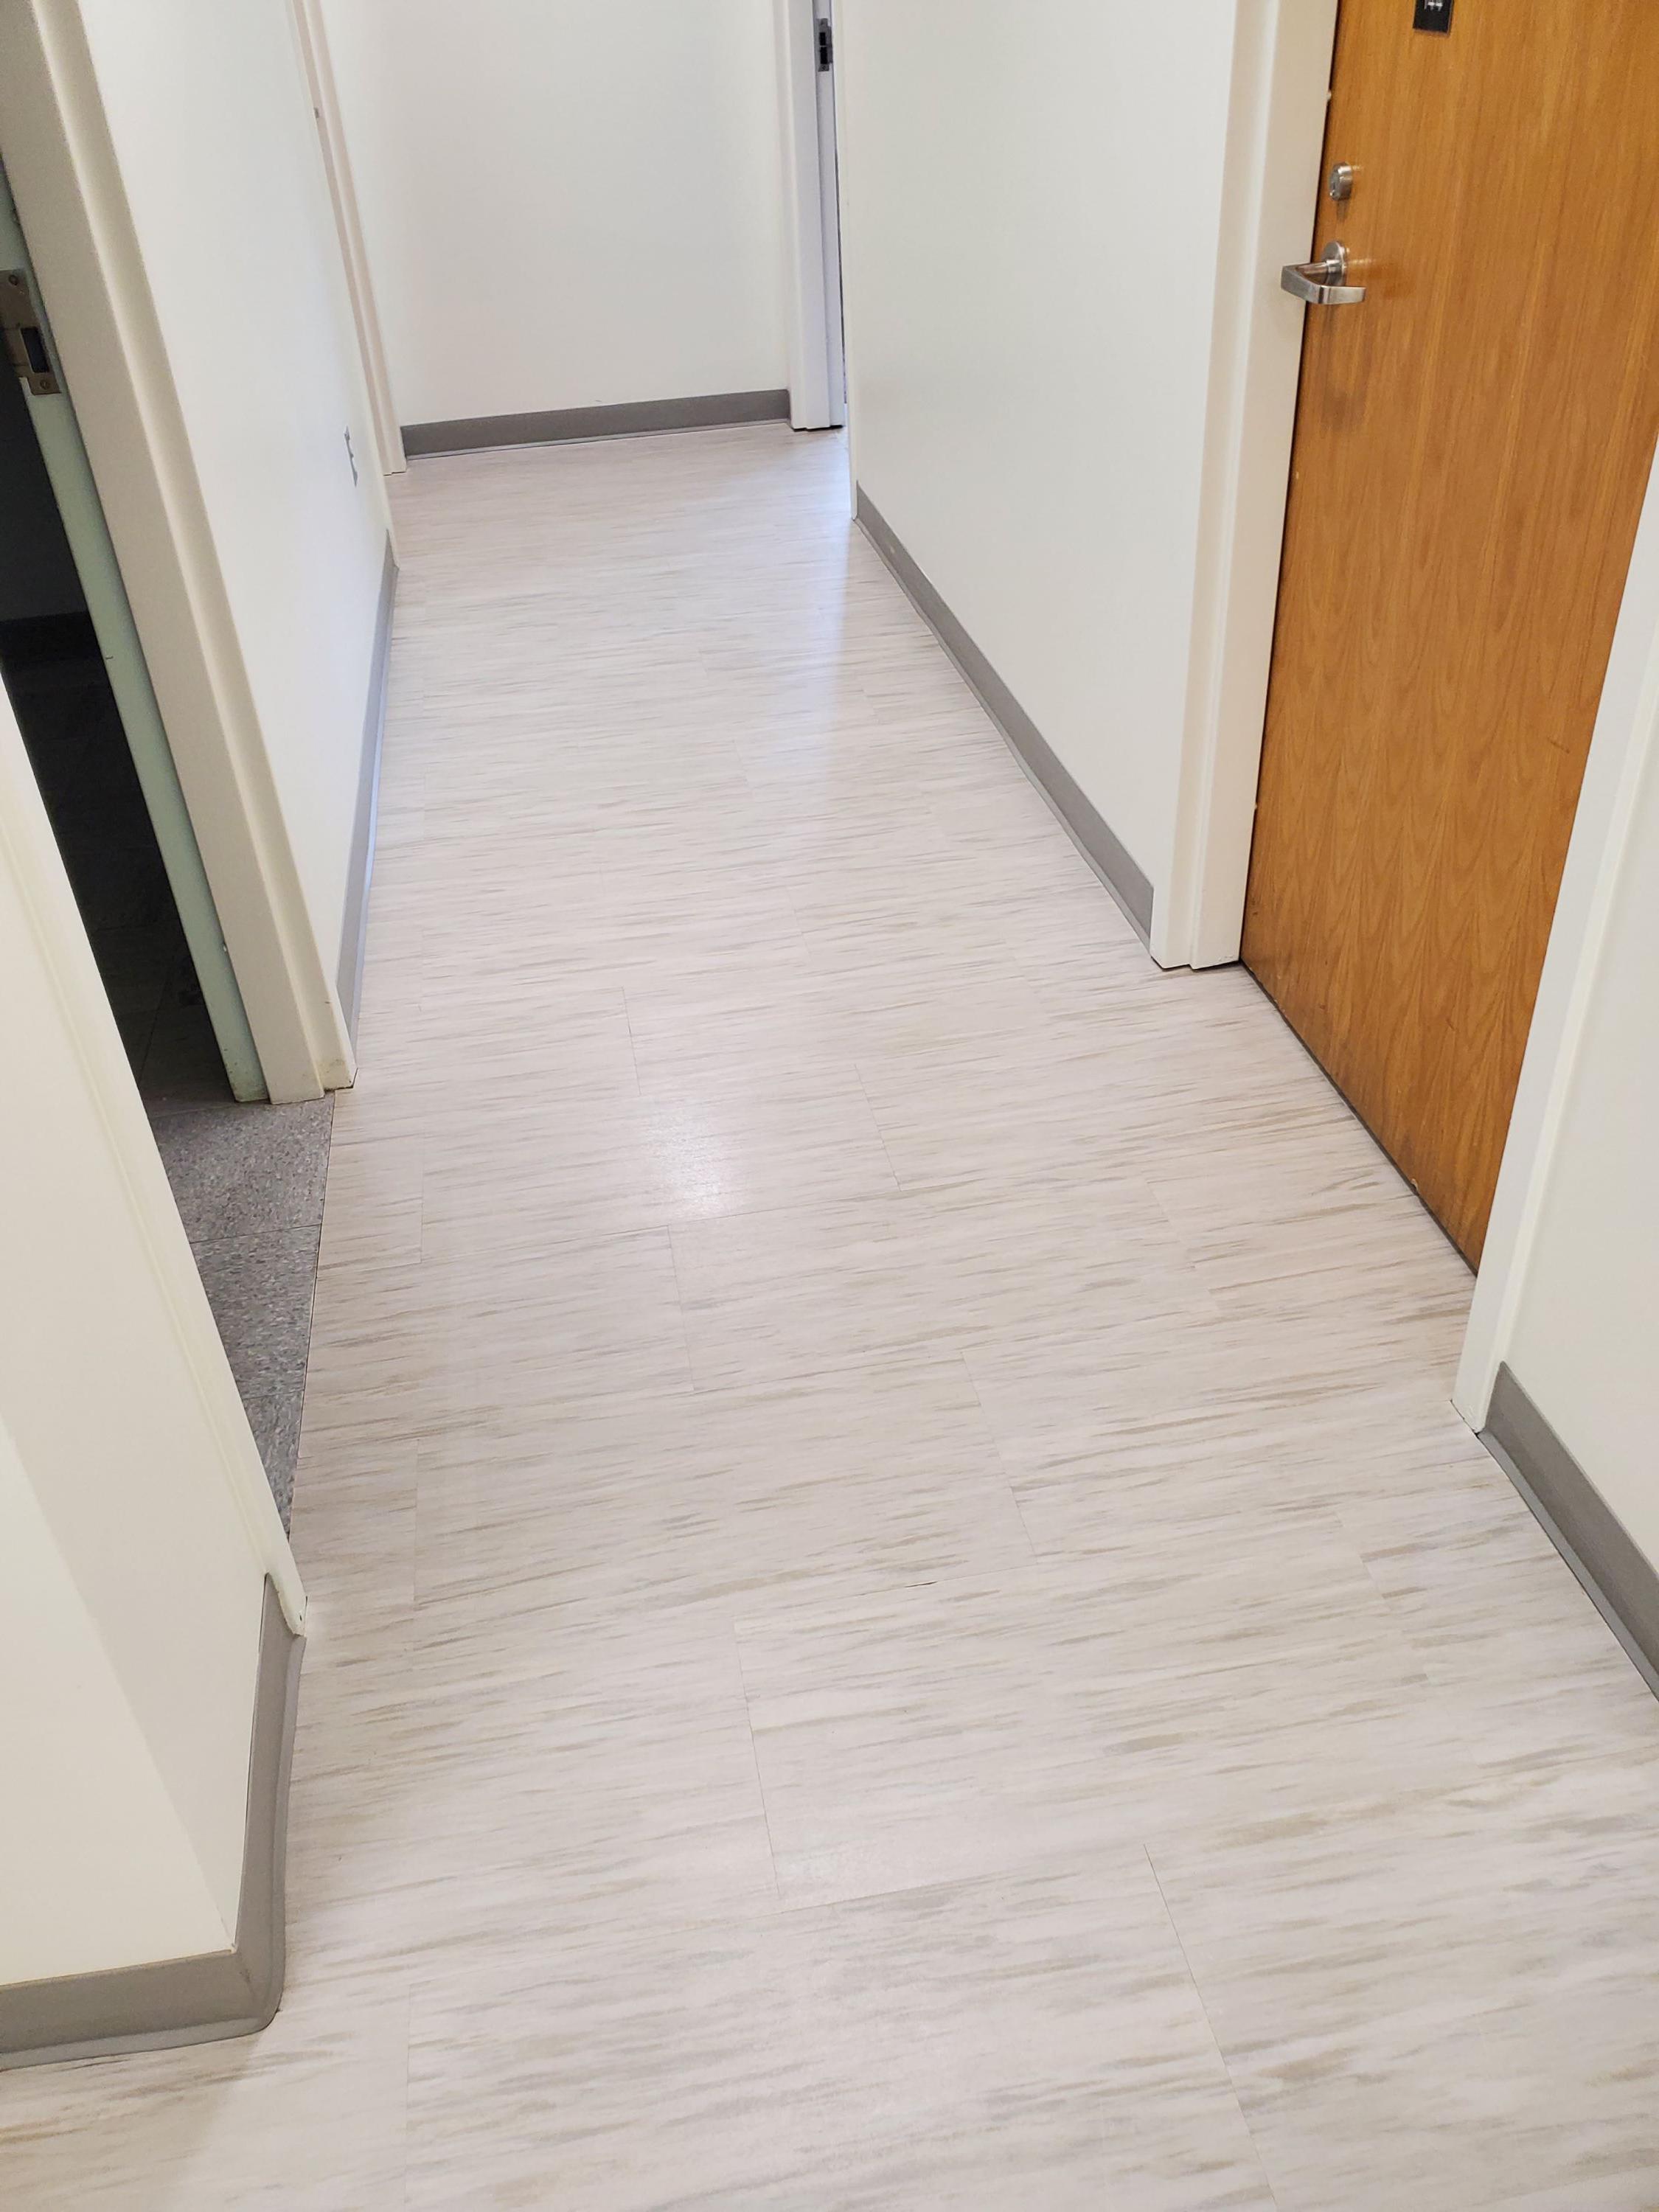 Enhance the cleanliness and hygiene of your office with our professional office cleaning services at Tri Town Property Services LLC Wareham (774)628-8627